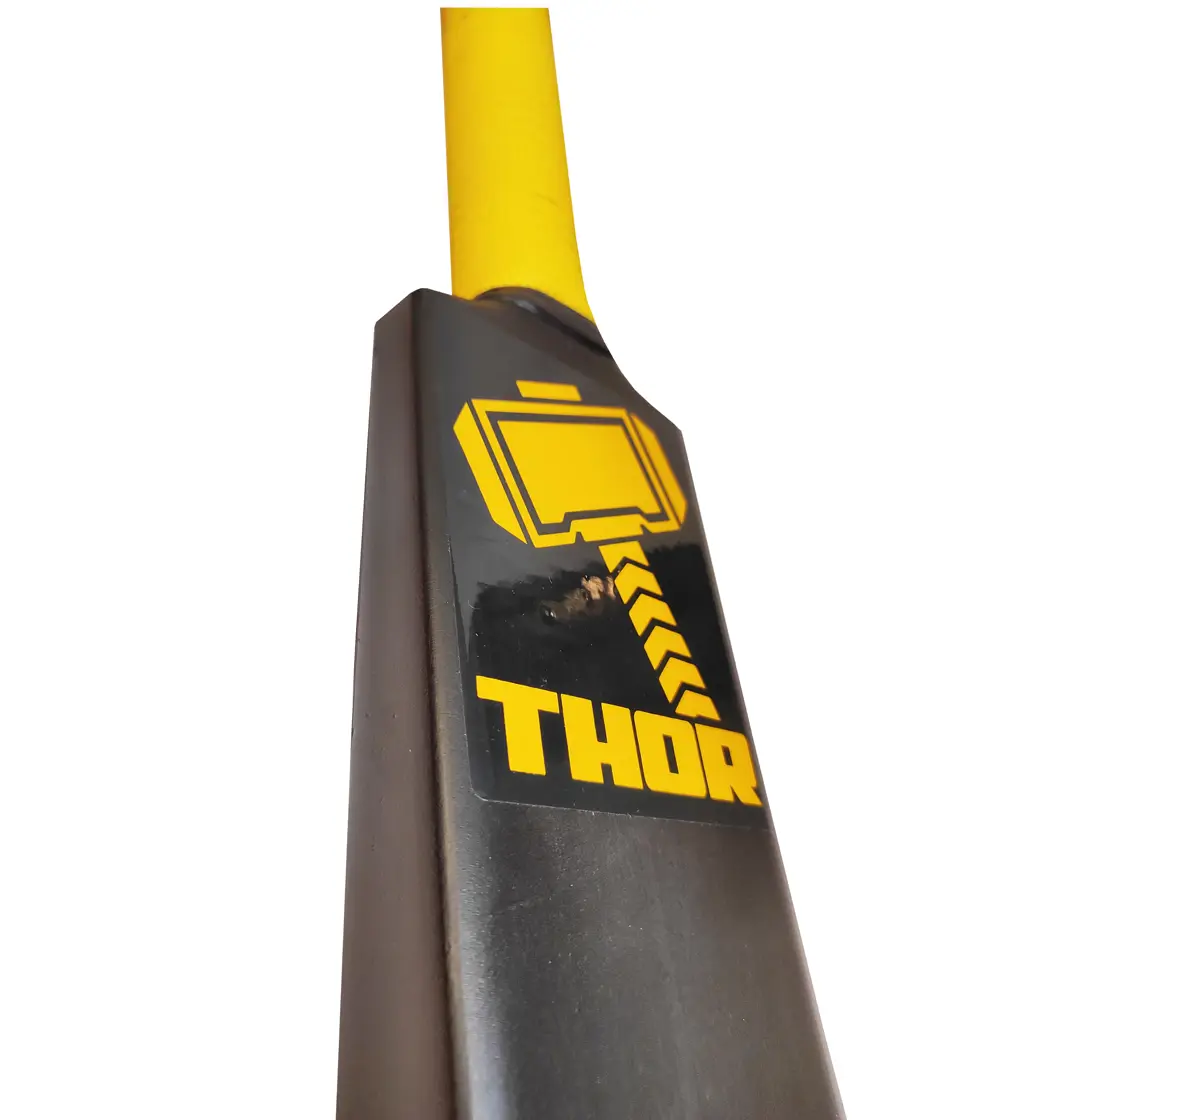 Starter Thor Cricket Bat And Ball Set Size 4 Multicolour, 3Y+